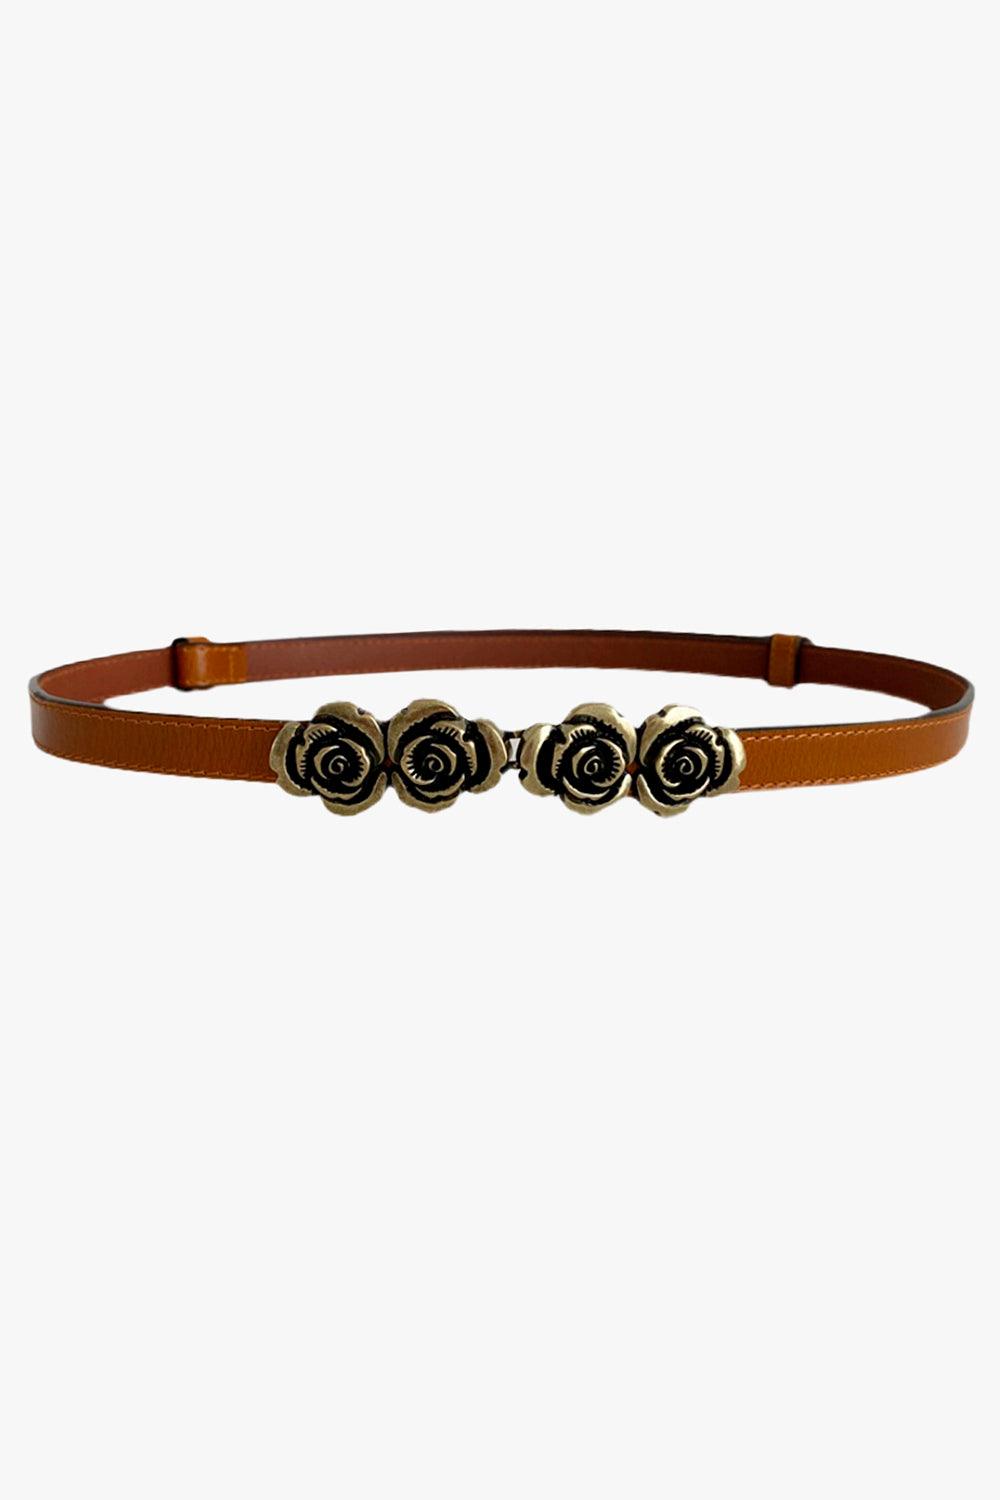 Four Roses Aesthetic Belt - Aesthetic Clothes Shop